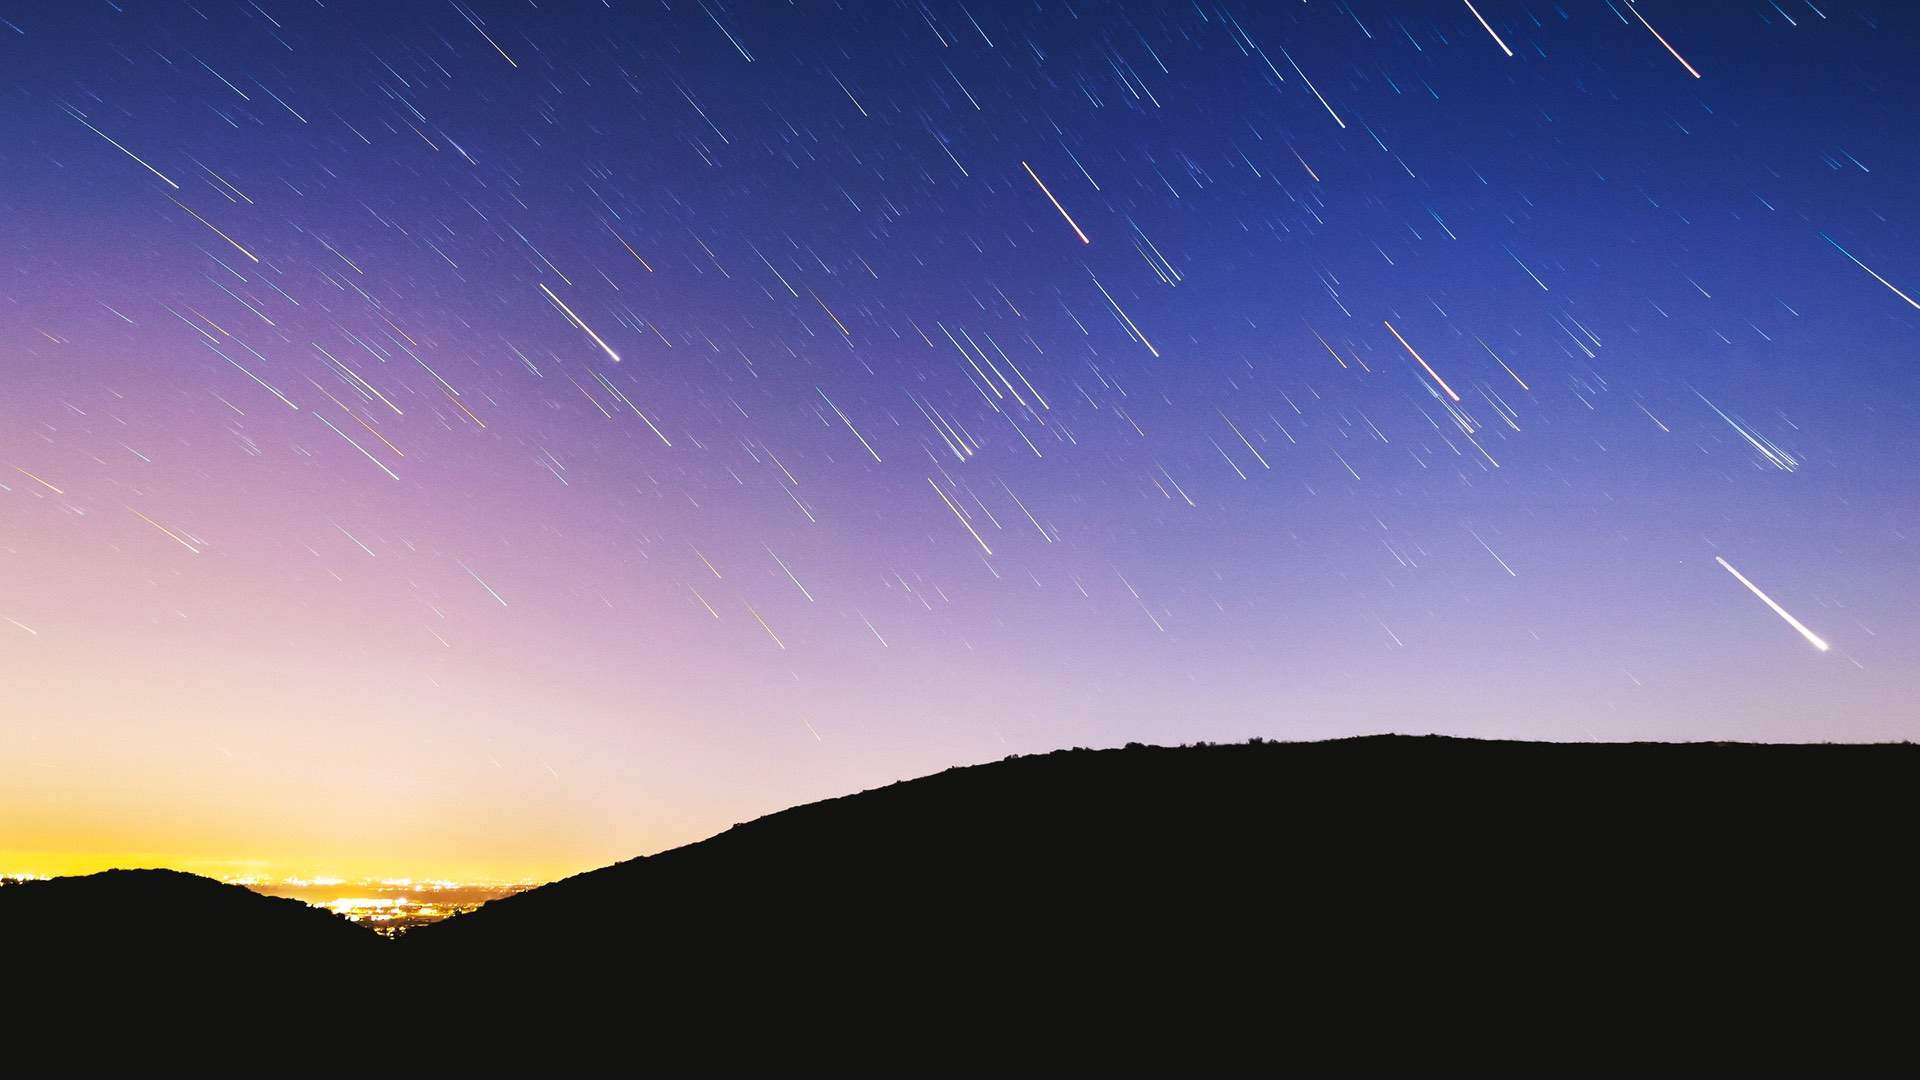 Everything You Need to Know About 2021's Eta Aquarids Meteor Shower